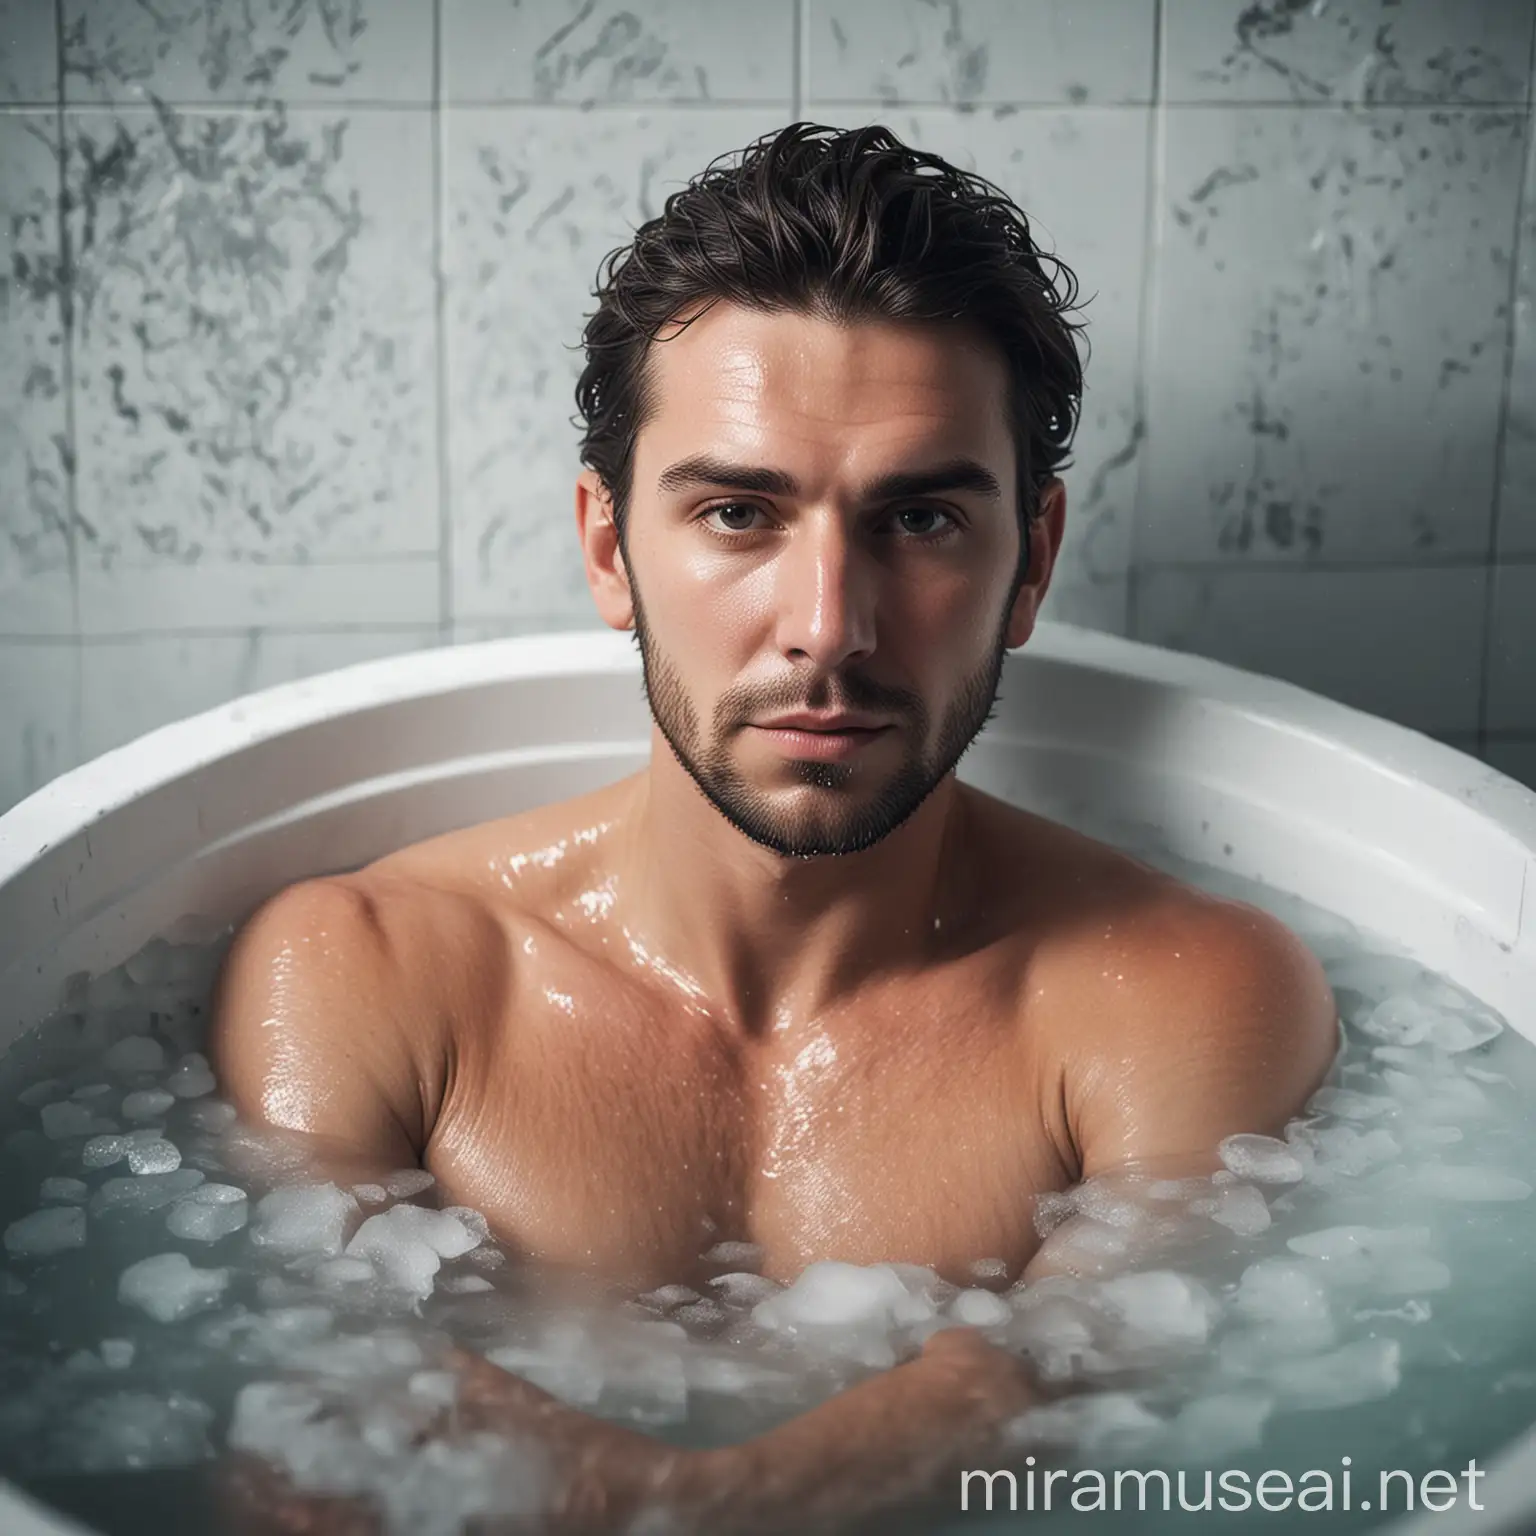 Create a realistic image of an ice bath with a man inside with a calm look